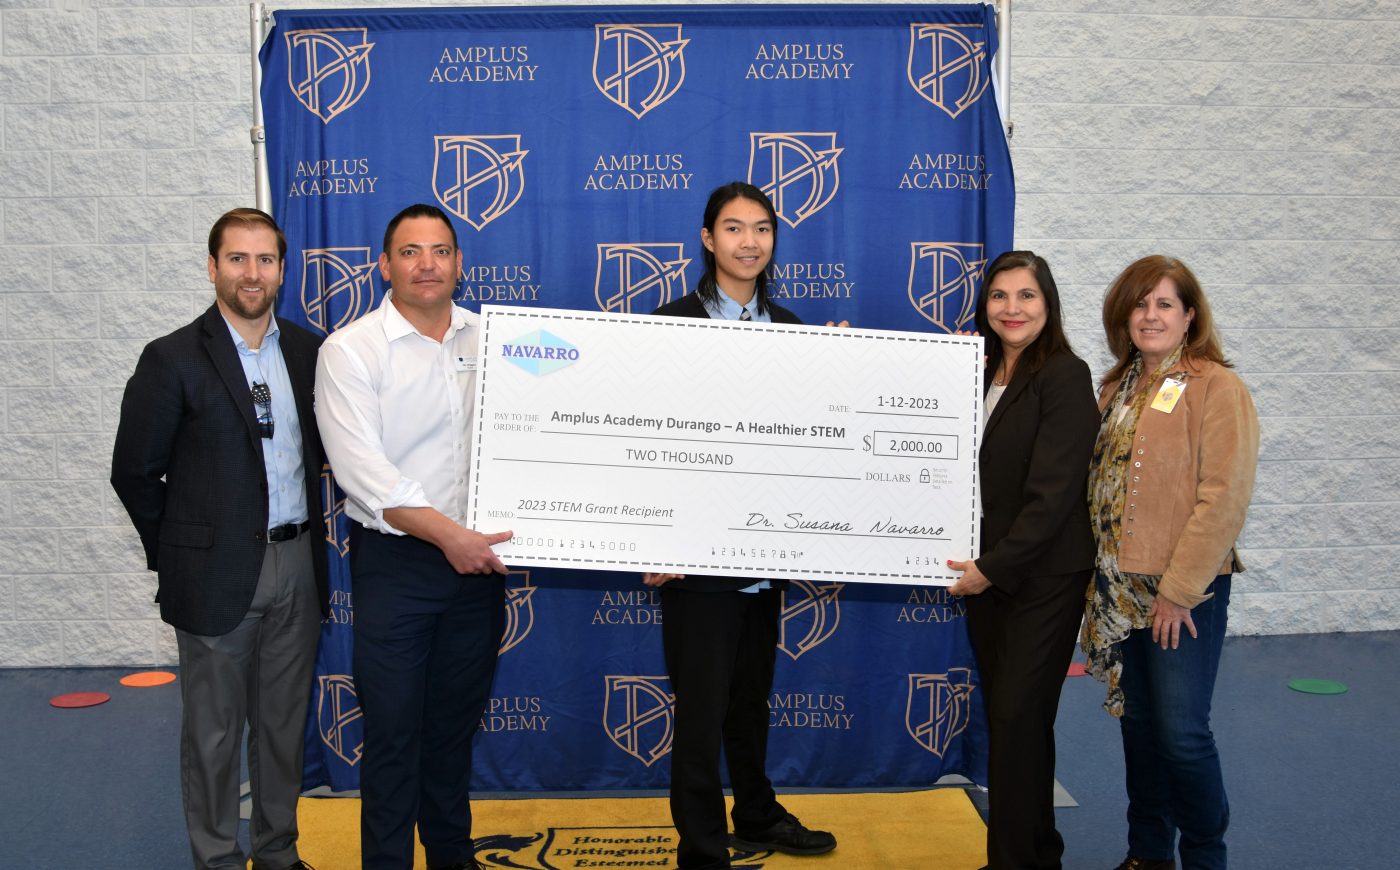 small group of children and adults holding big check in front of a blue backdrop with school logos on it